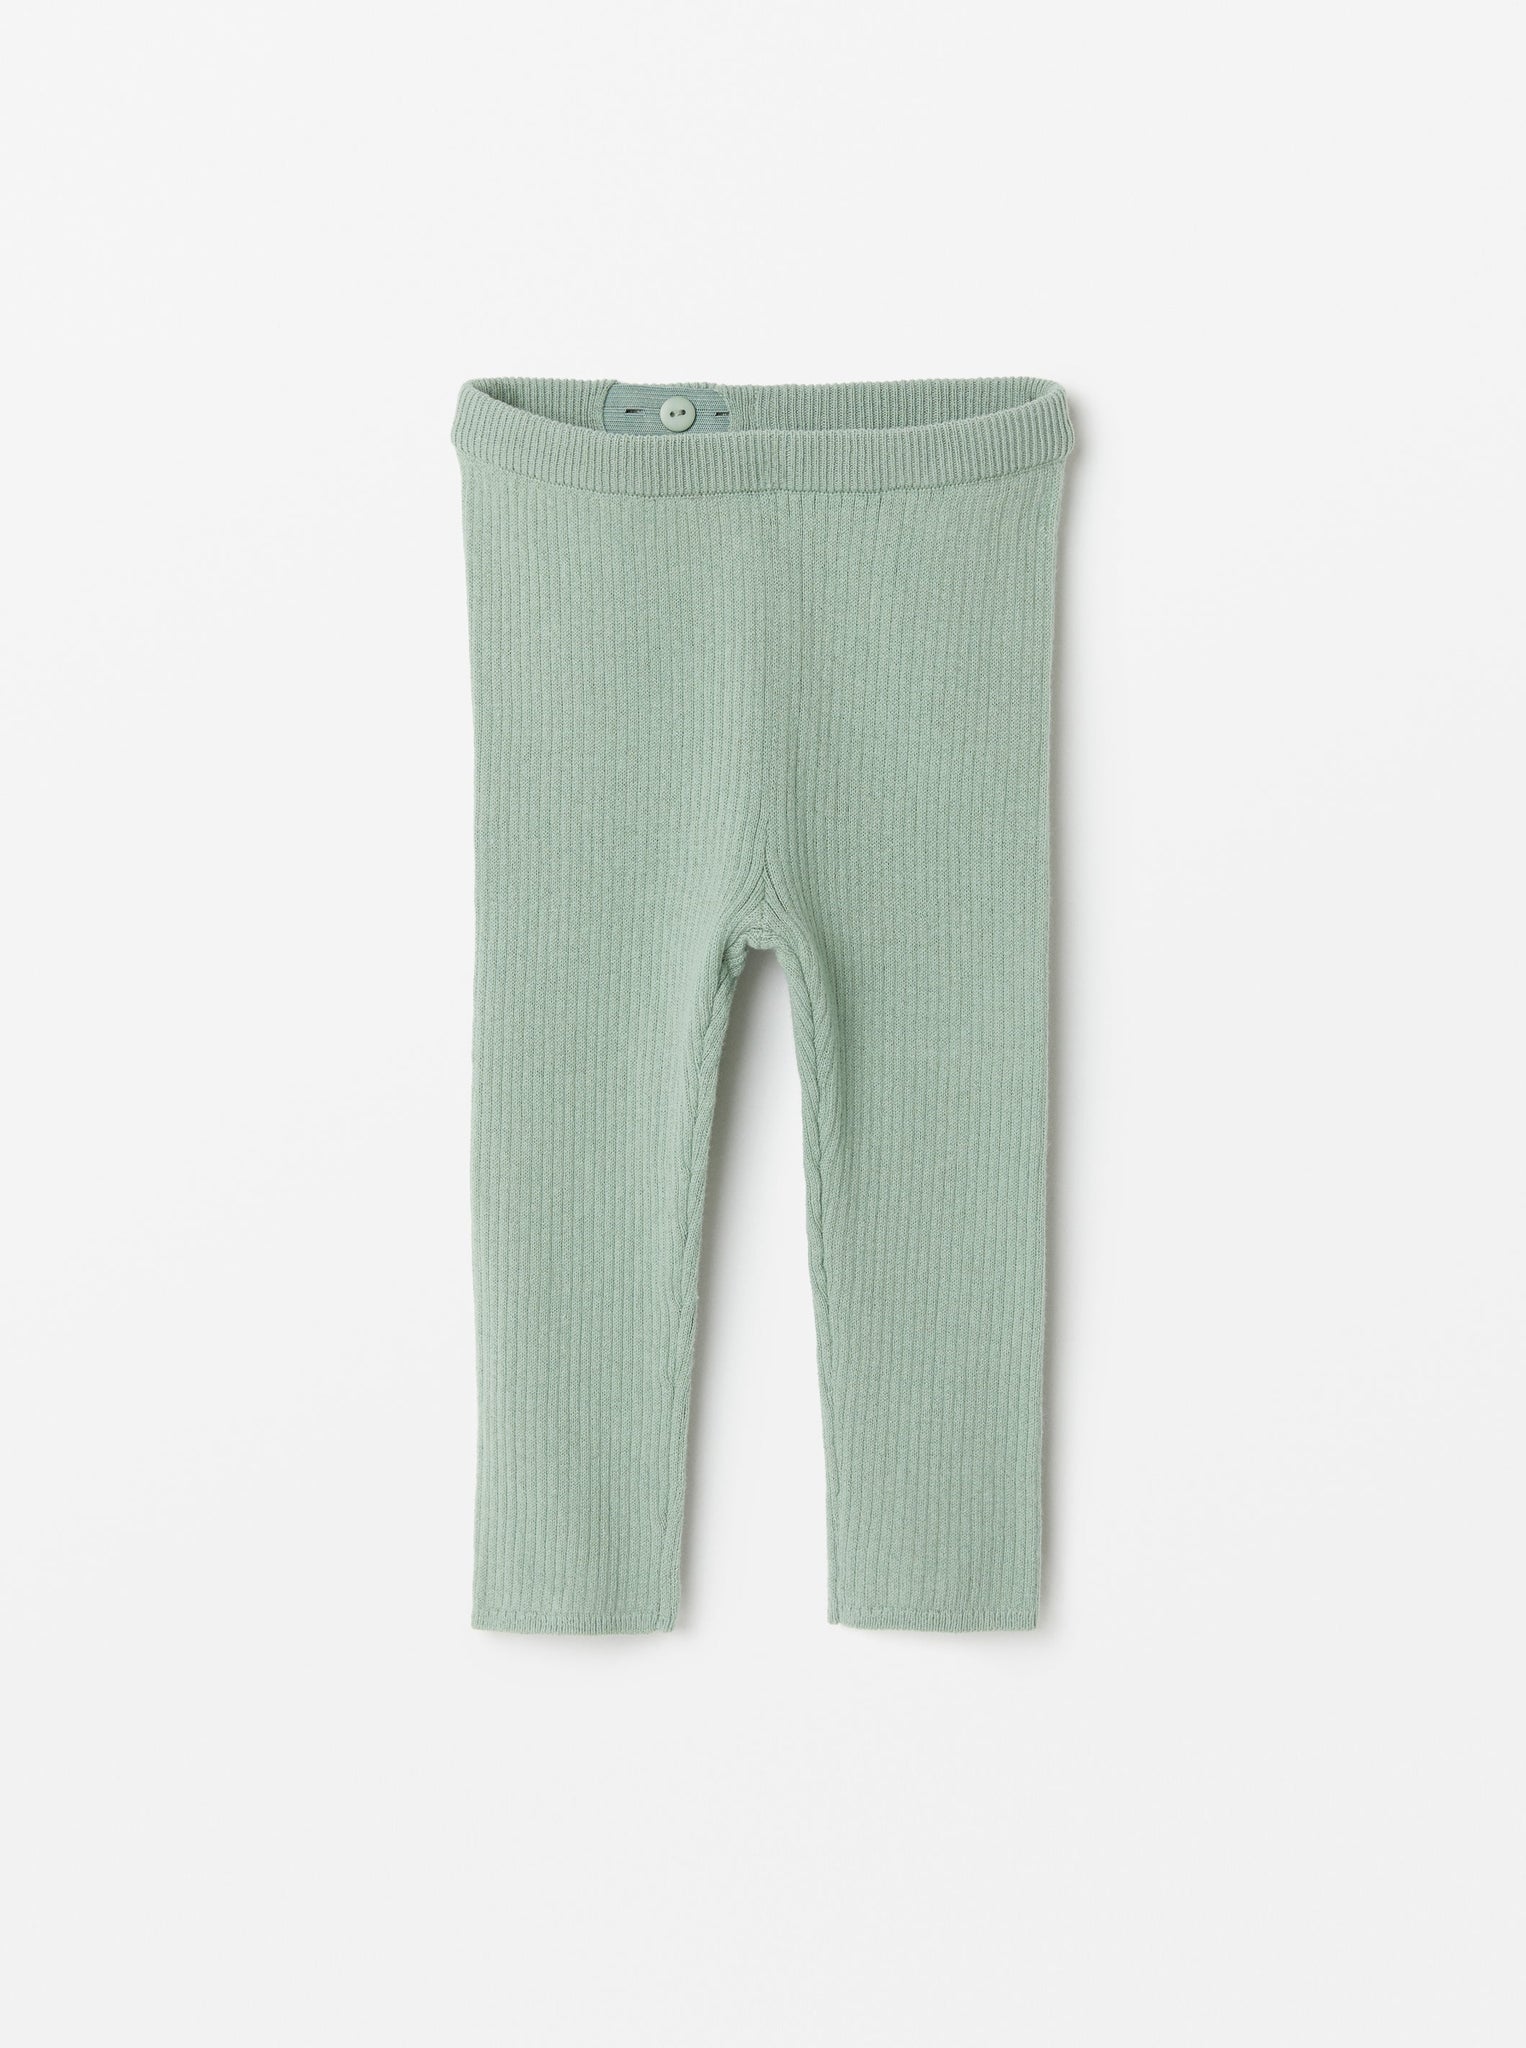 Ribbed Green Knitted Baby Trousers from the Polarn O. Pyret babywear collection. Clothes made using sustainably sourced materials.